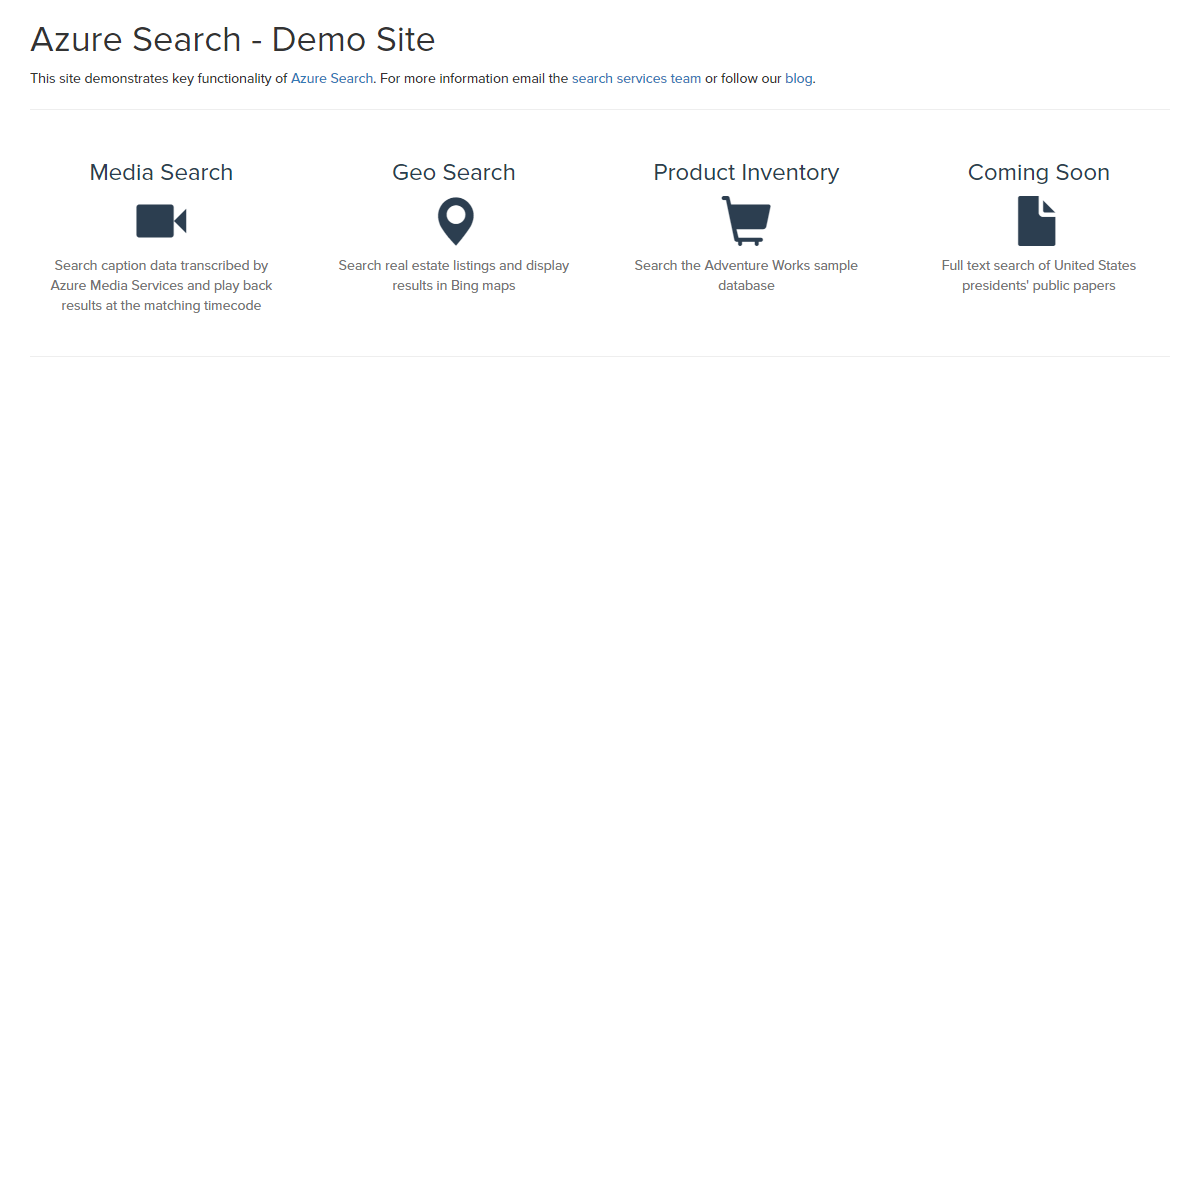 A complete backup of https://searchsamples.azurewebsites.net/